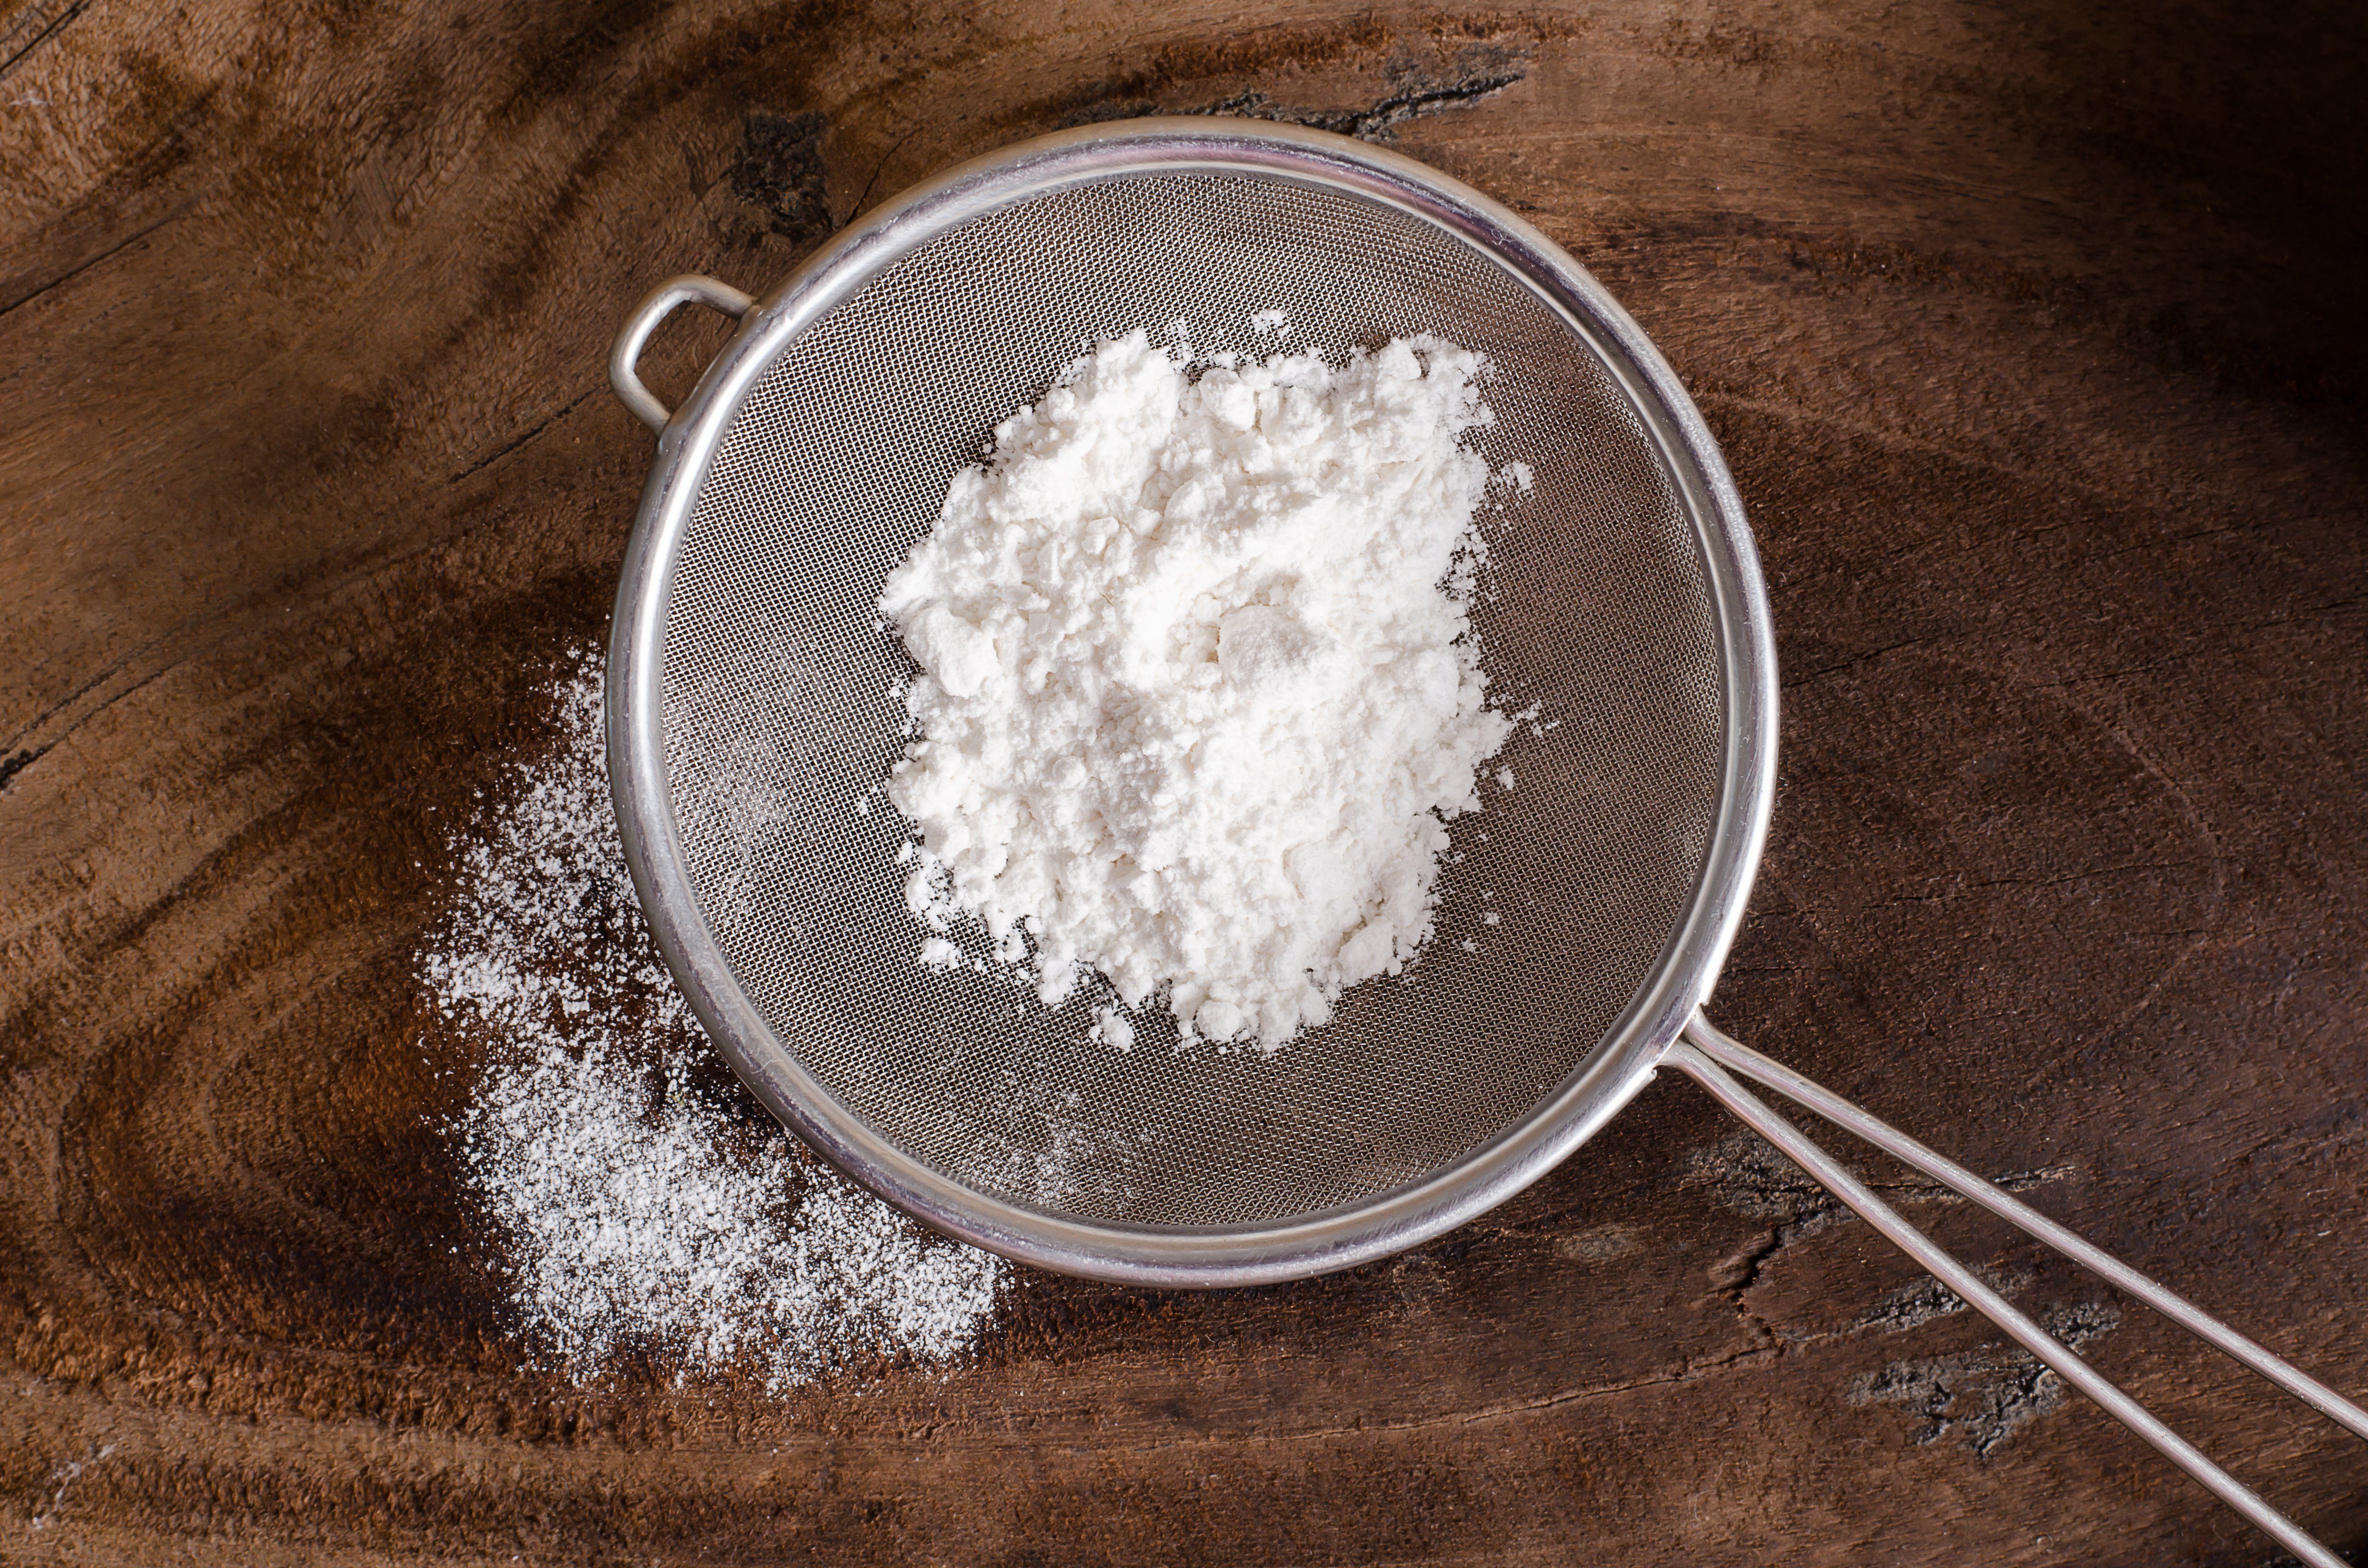 Wheat flour in a sieve on wooden background, food ingredient, prepare for cooking or baking